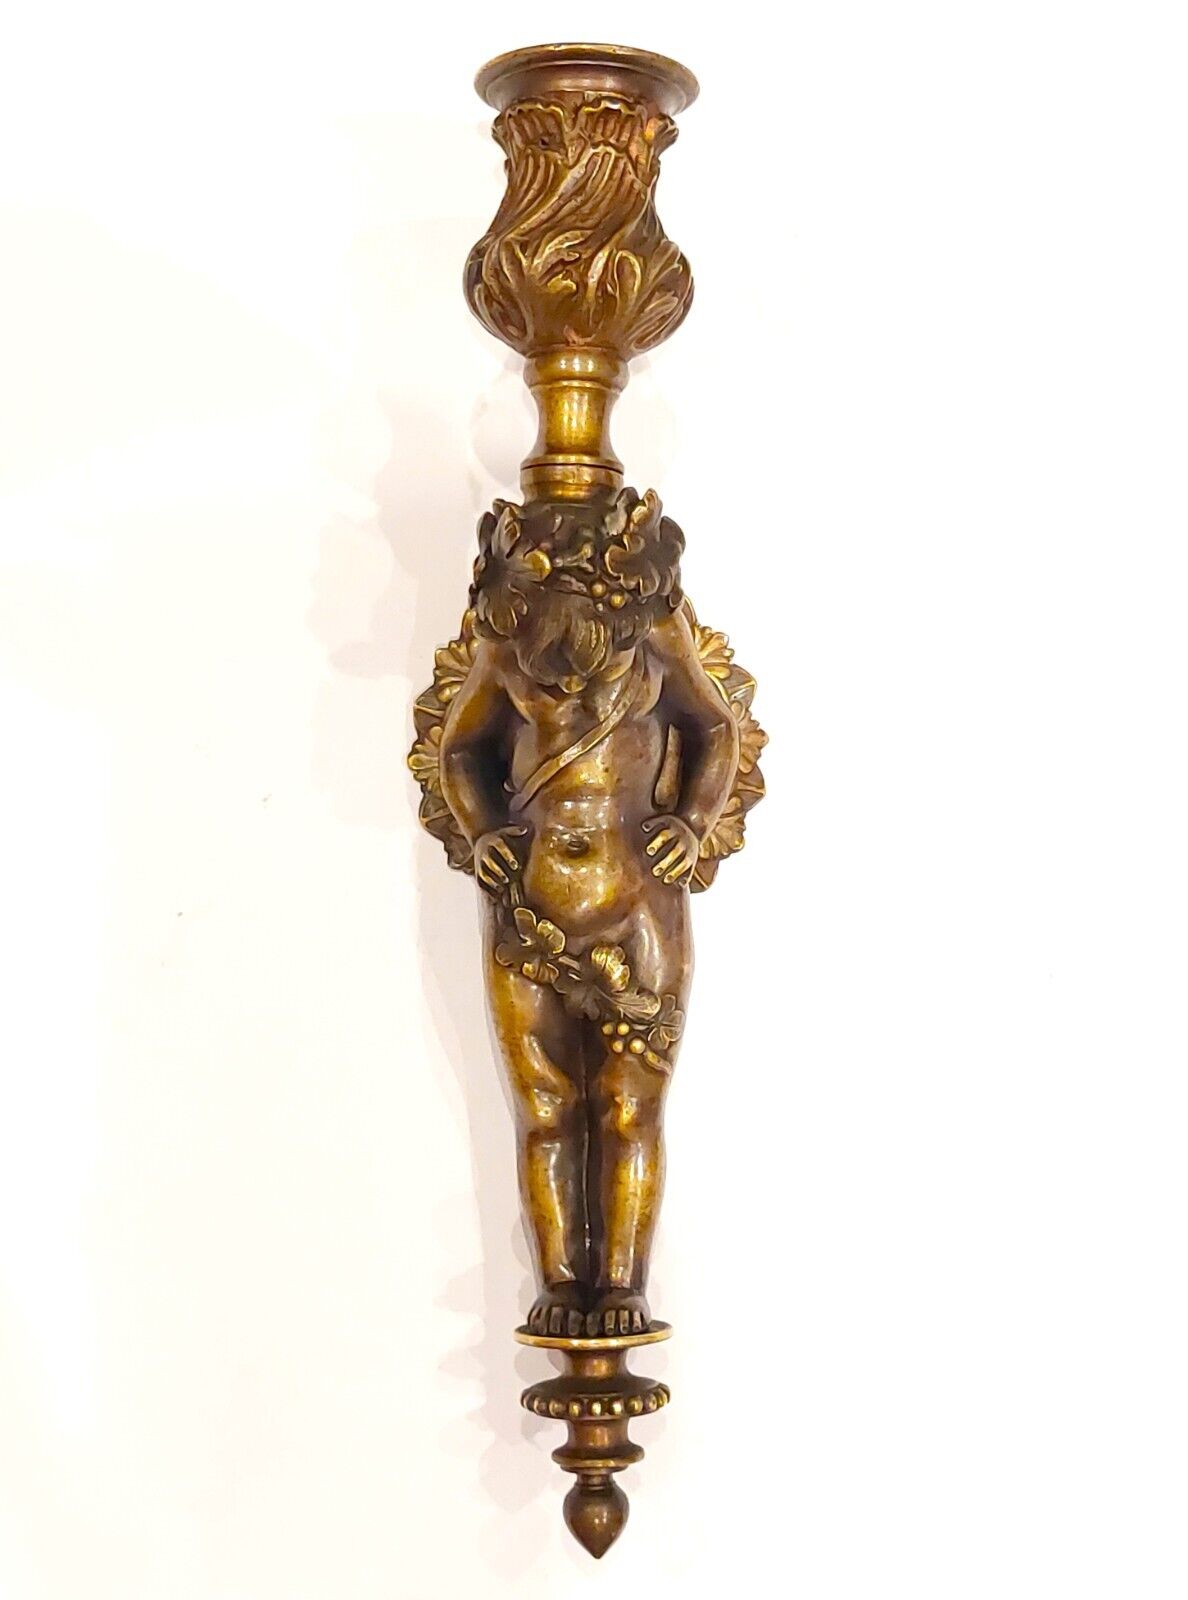 ANTIQUE SUPERB HENRY DASSON STYLE CHILD FAUNO BACCHUS FIGURAL CANDLE LAMP SCONCE